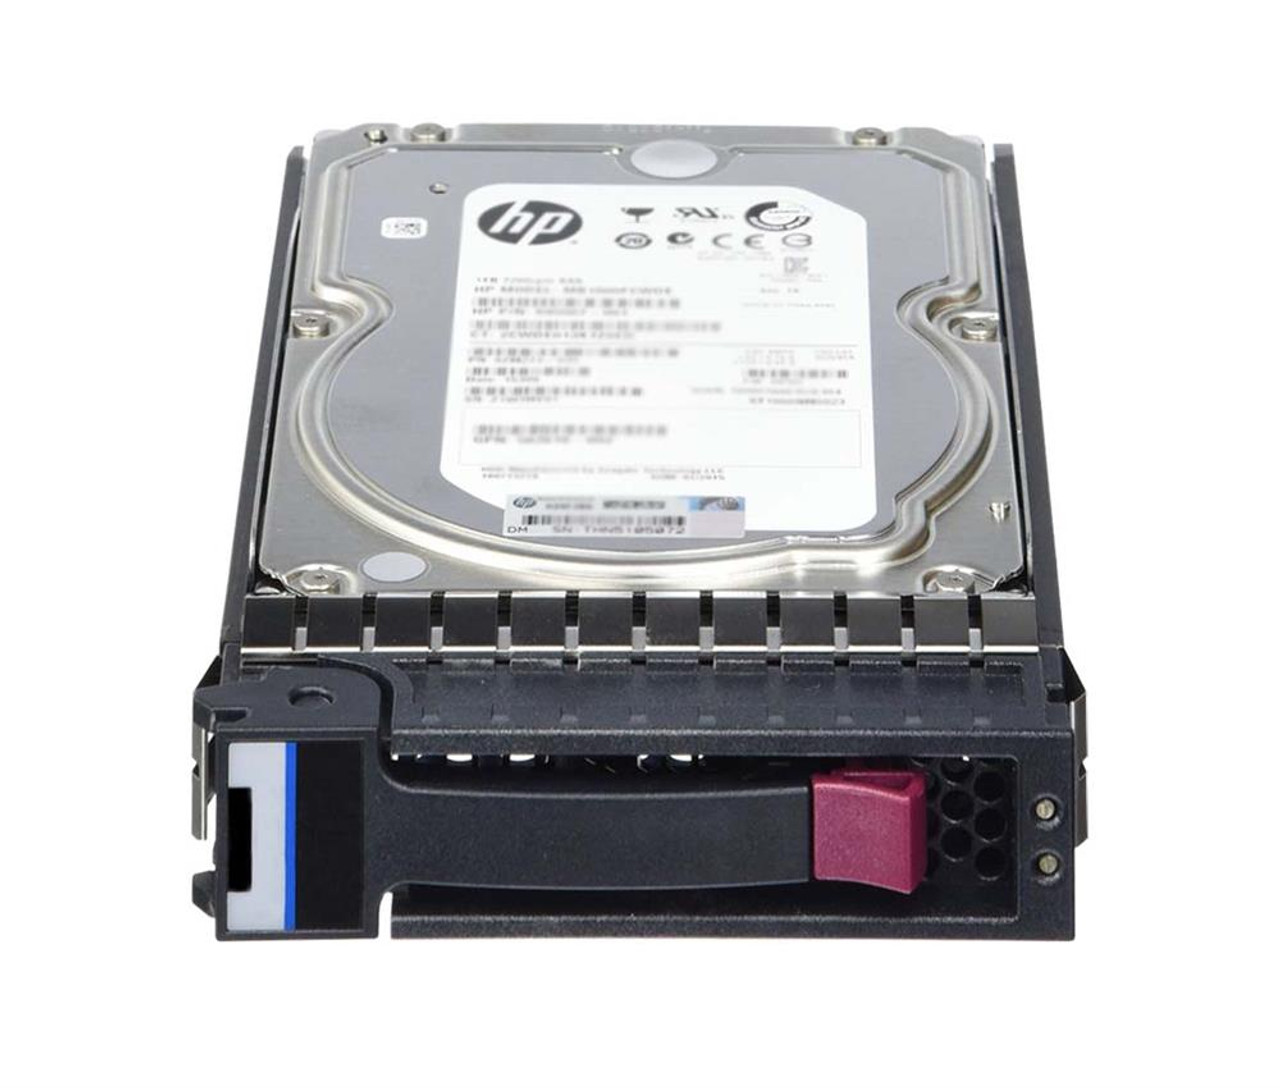 791150-002 HPE 6TB 7200RPM SAS 12Gbps Midline (512e) 3.5-inch Internal Hard Drive with Smart Carrier